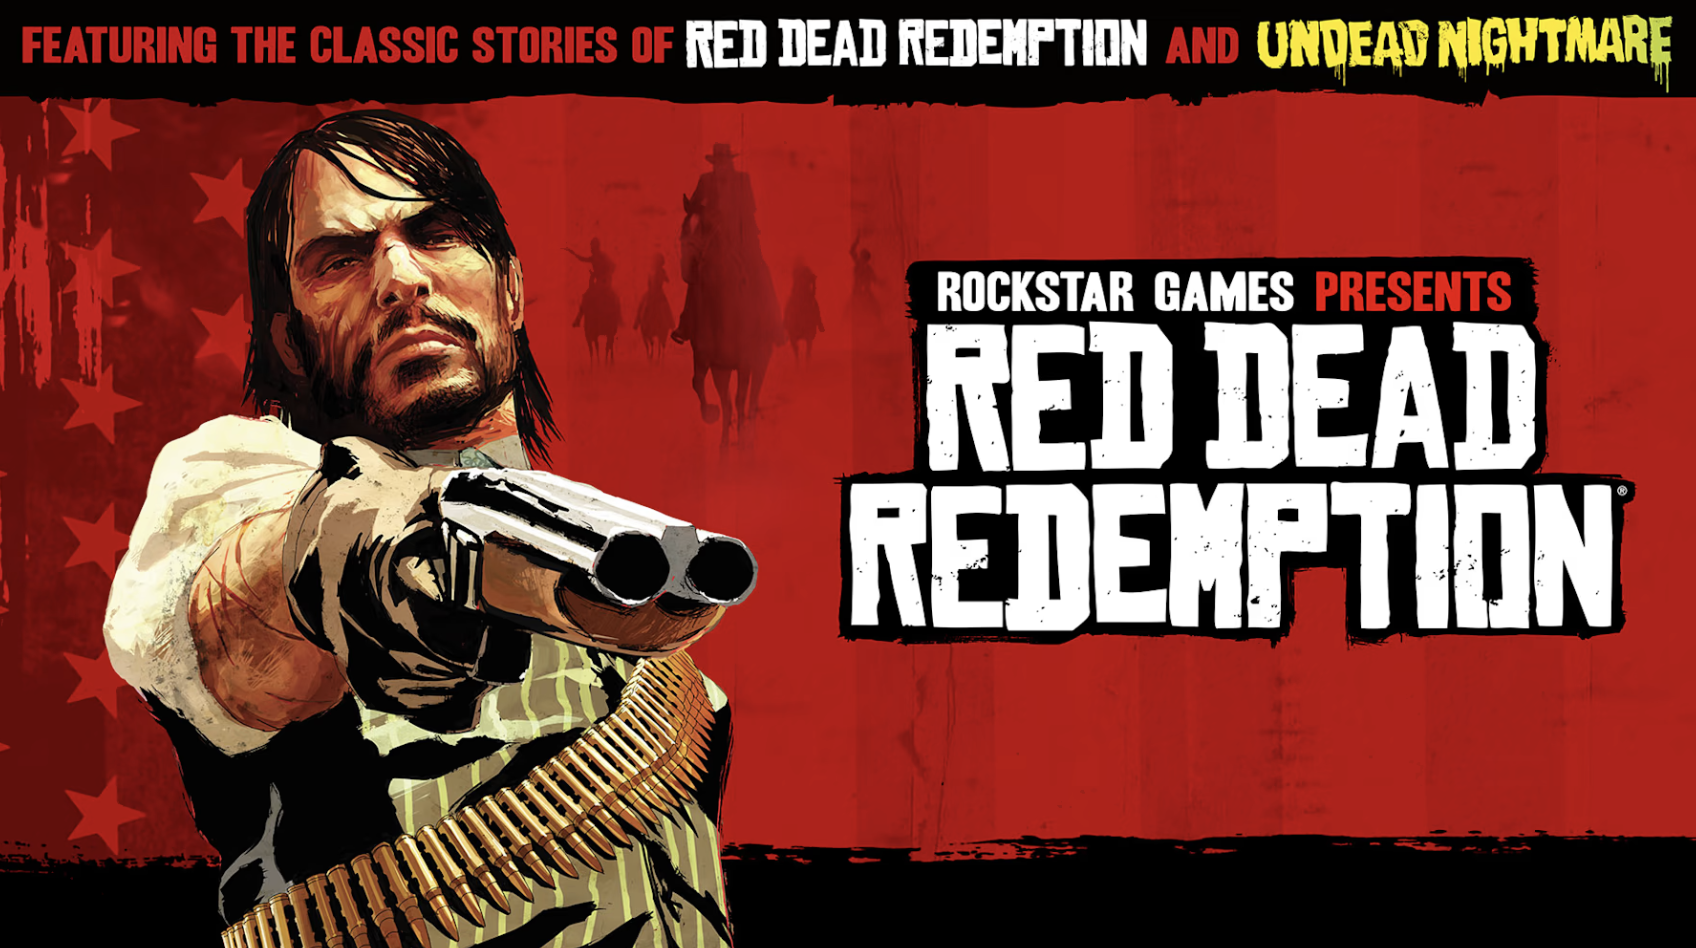 SwitchArcade Round-Up: Reviews Featuring ‘Red Dead Redemption’ & ‘Quantum: Recharged’, Plus New Releases, Sales, and More